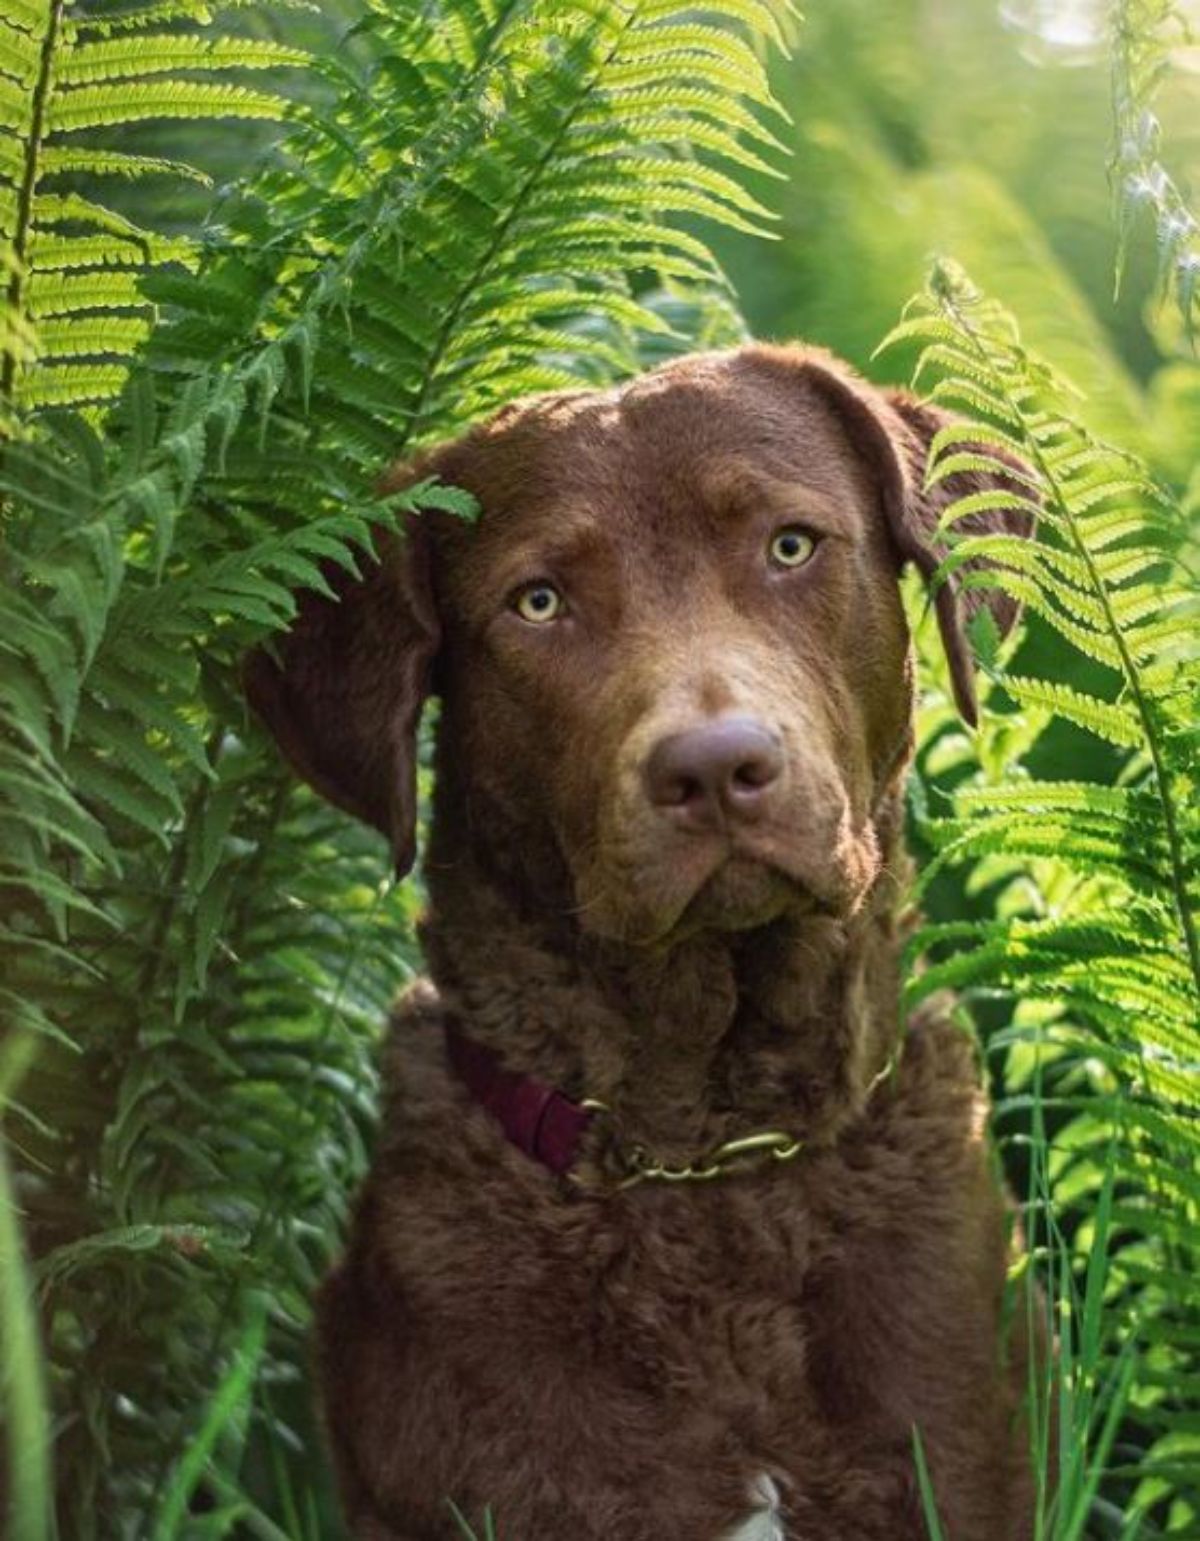 Chesapeake Bay Retriever in the middle of the green leaves with its sad face